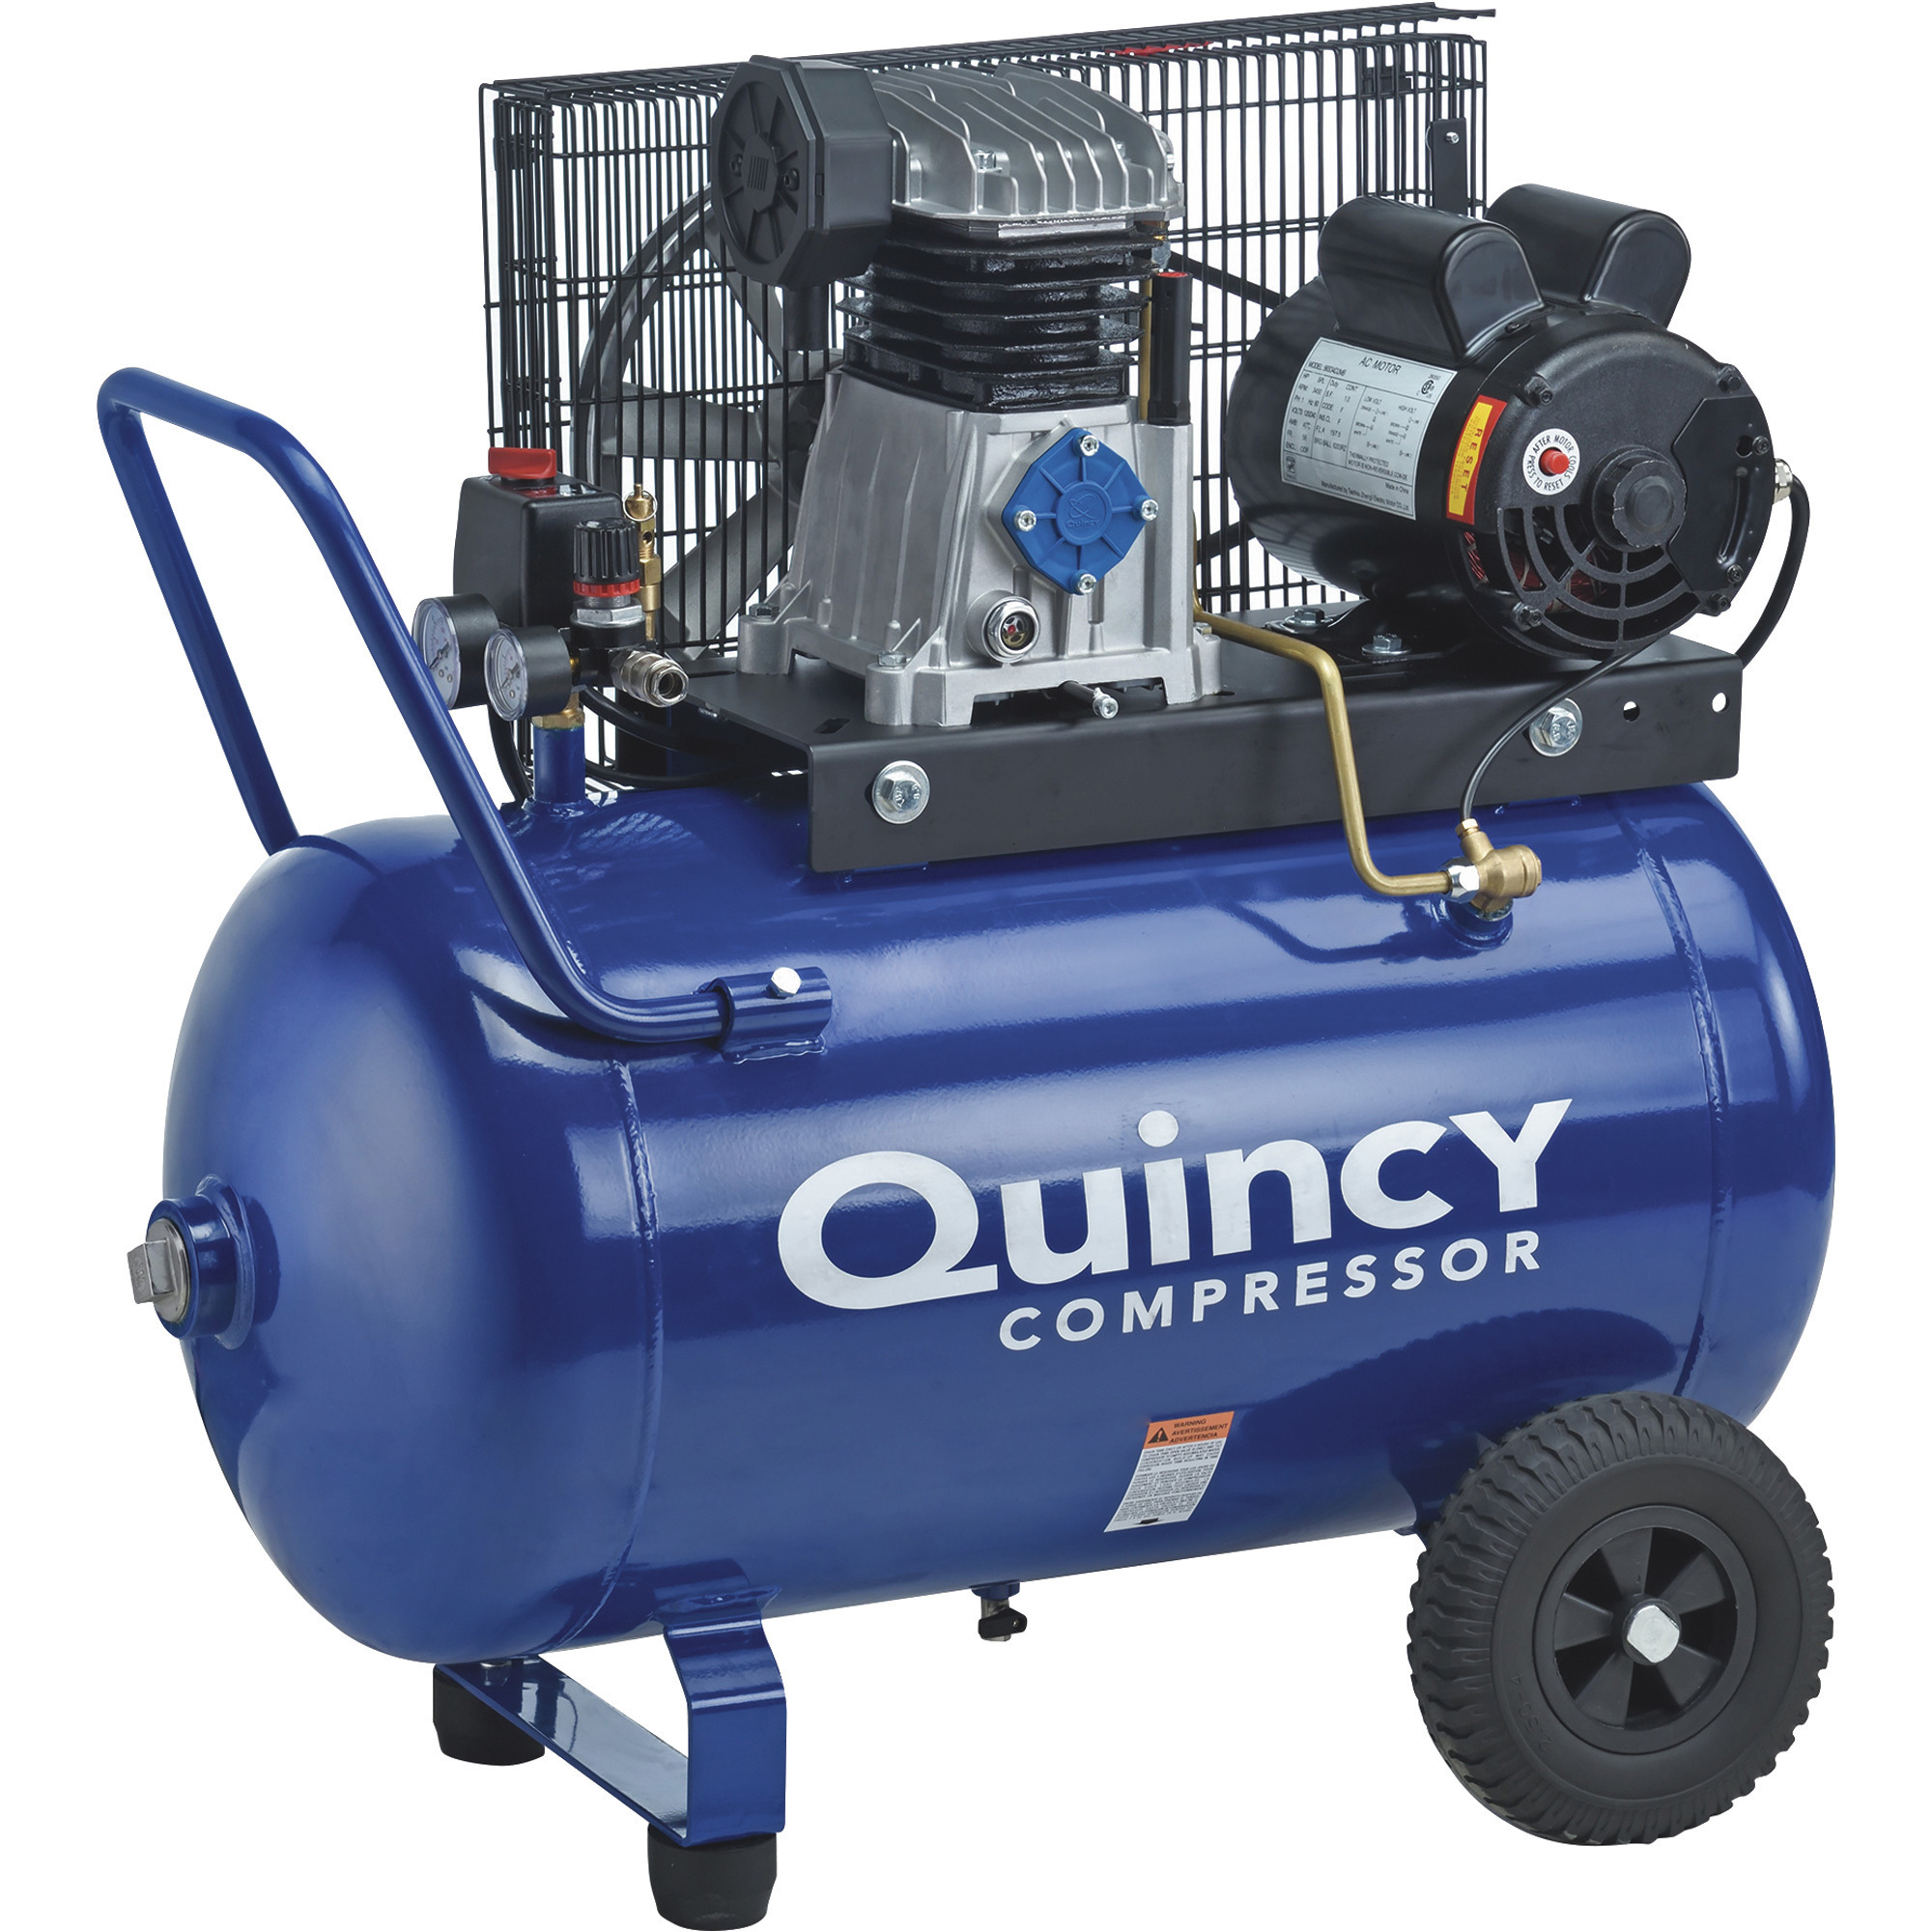 Quincy Single-Stage Portable Electric Air Compressor, 2 HP, 24-Gallon Horizontal, 7.4 CFM, Model Q12124HP